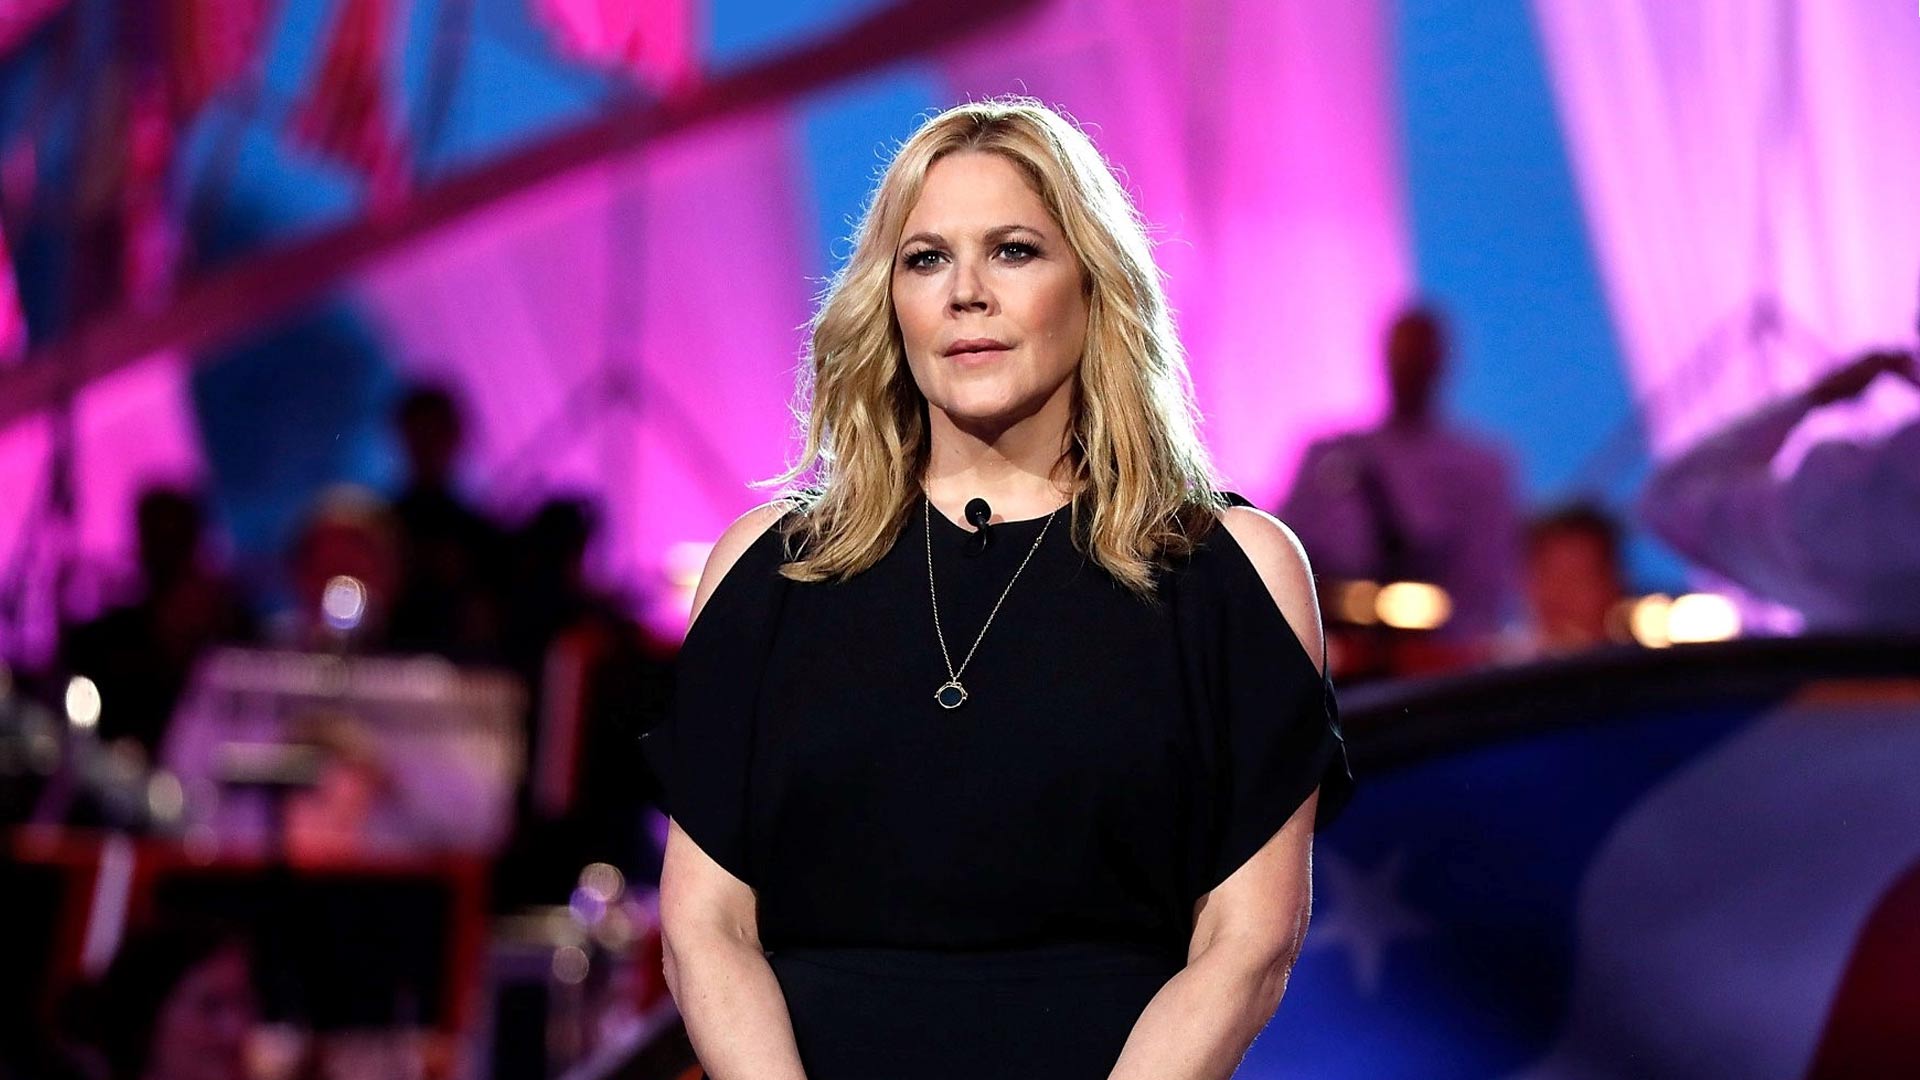 Tony nominated actress and star of TV's "The West Wing," "Loaded" and "The Kids Are Alright," Mary McCormack joins longtime concert host Joe Mantegna to co-host the 30th annual broadcast of the National Memorial Day Concert.